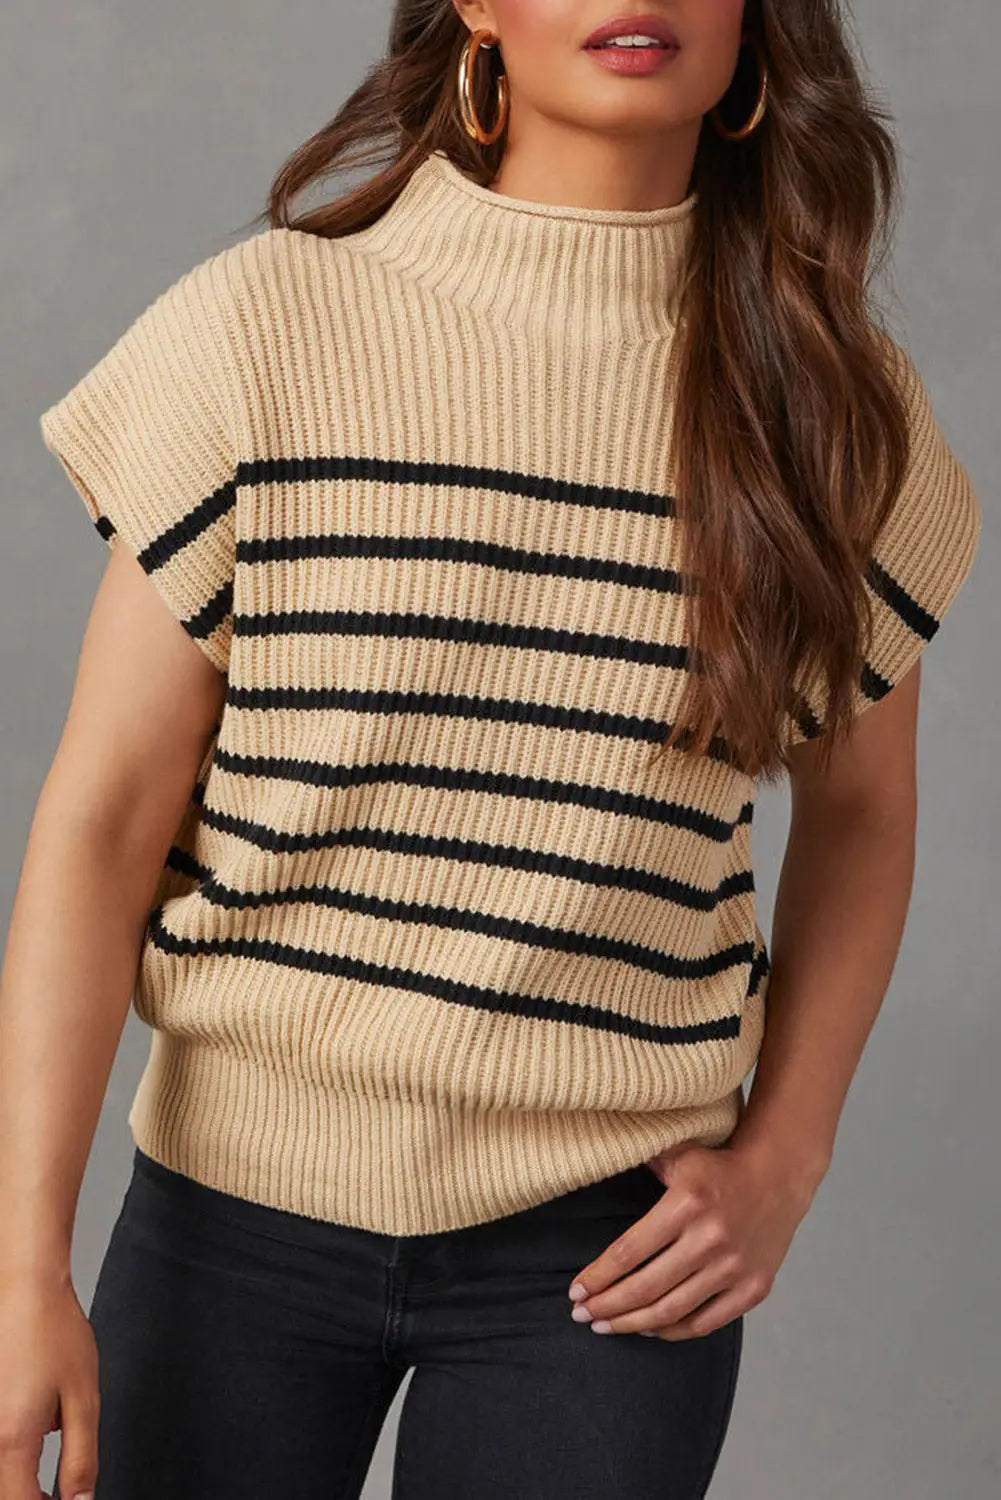 Parchment striped ribbed knit high neck sweater - l / 55% acrylic + 45% cotton - sweaters & cardigans